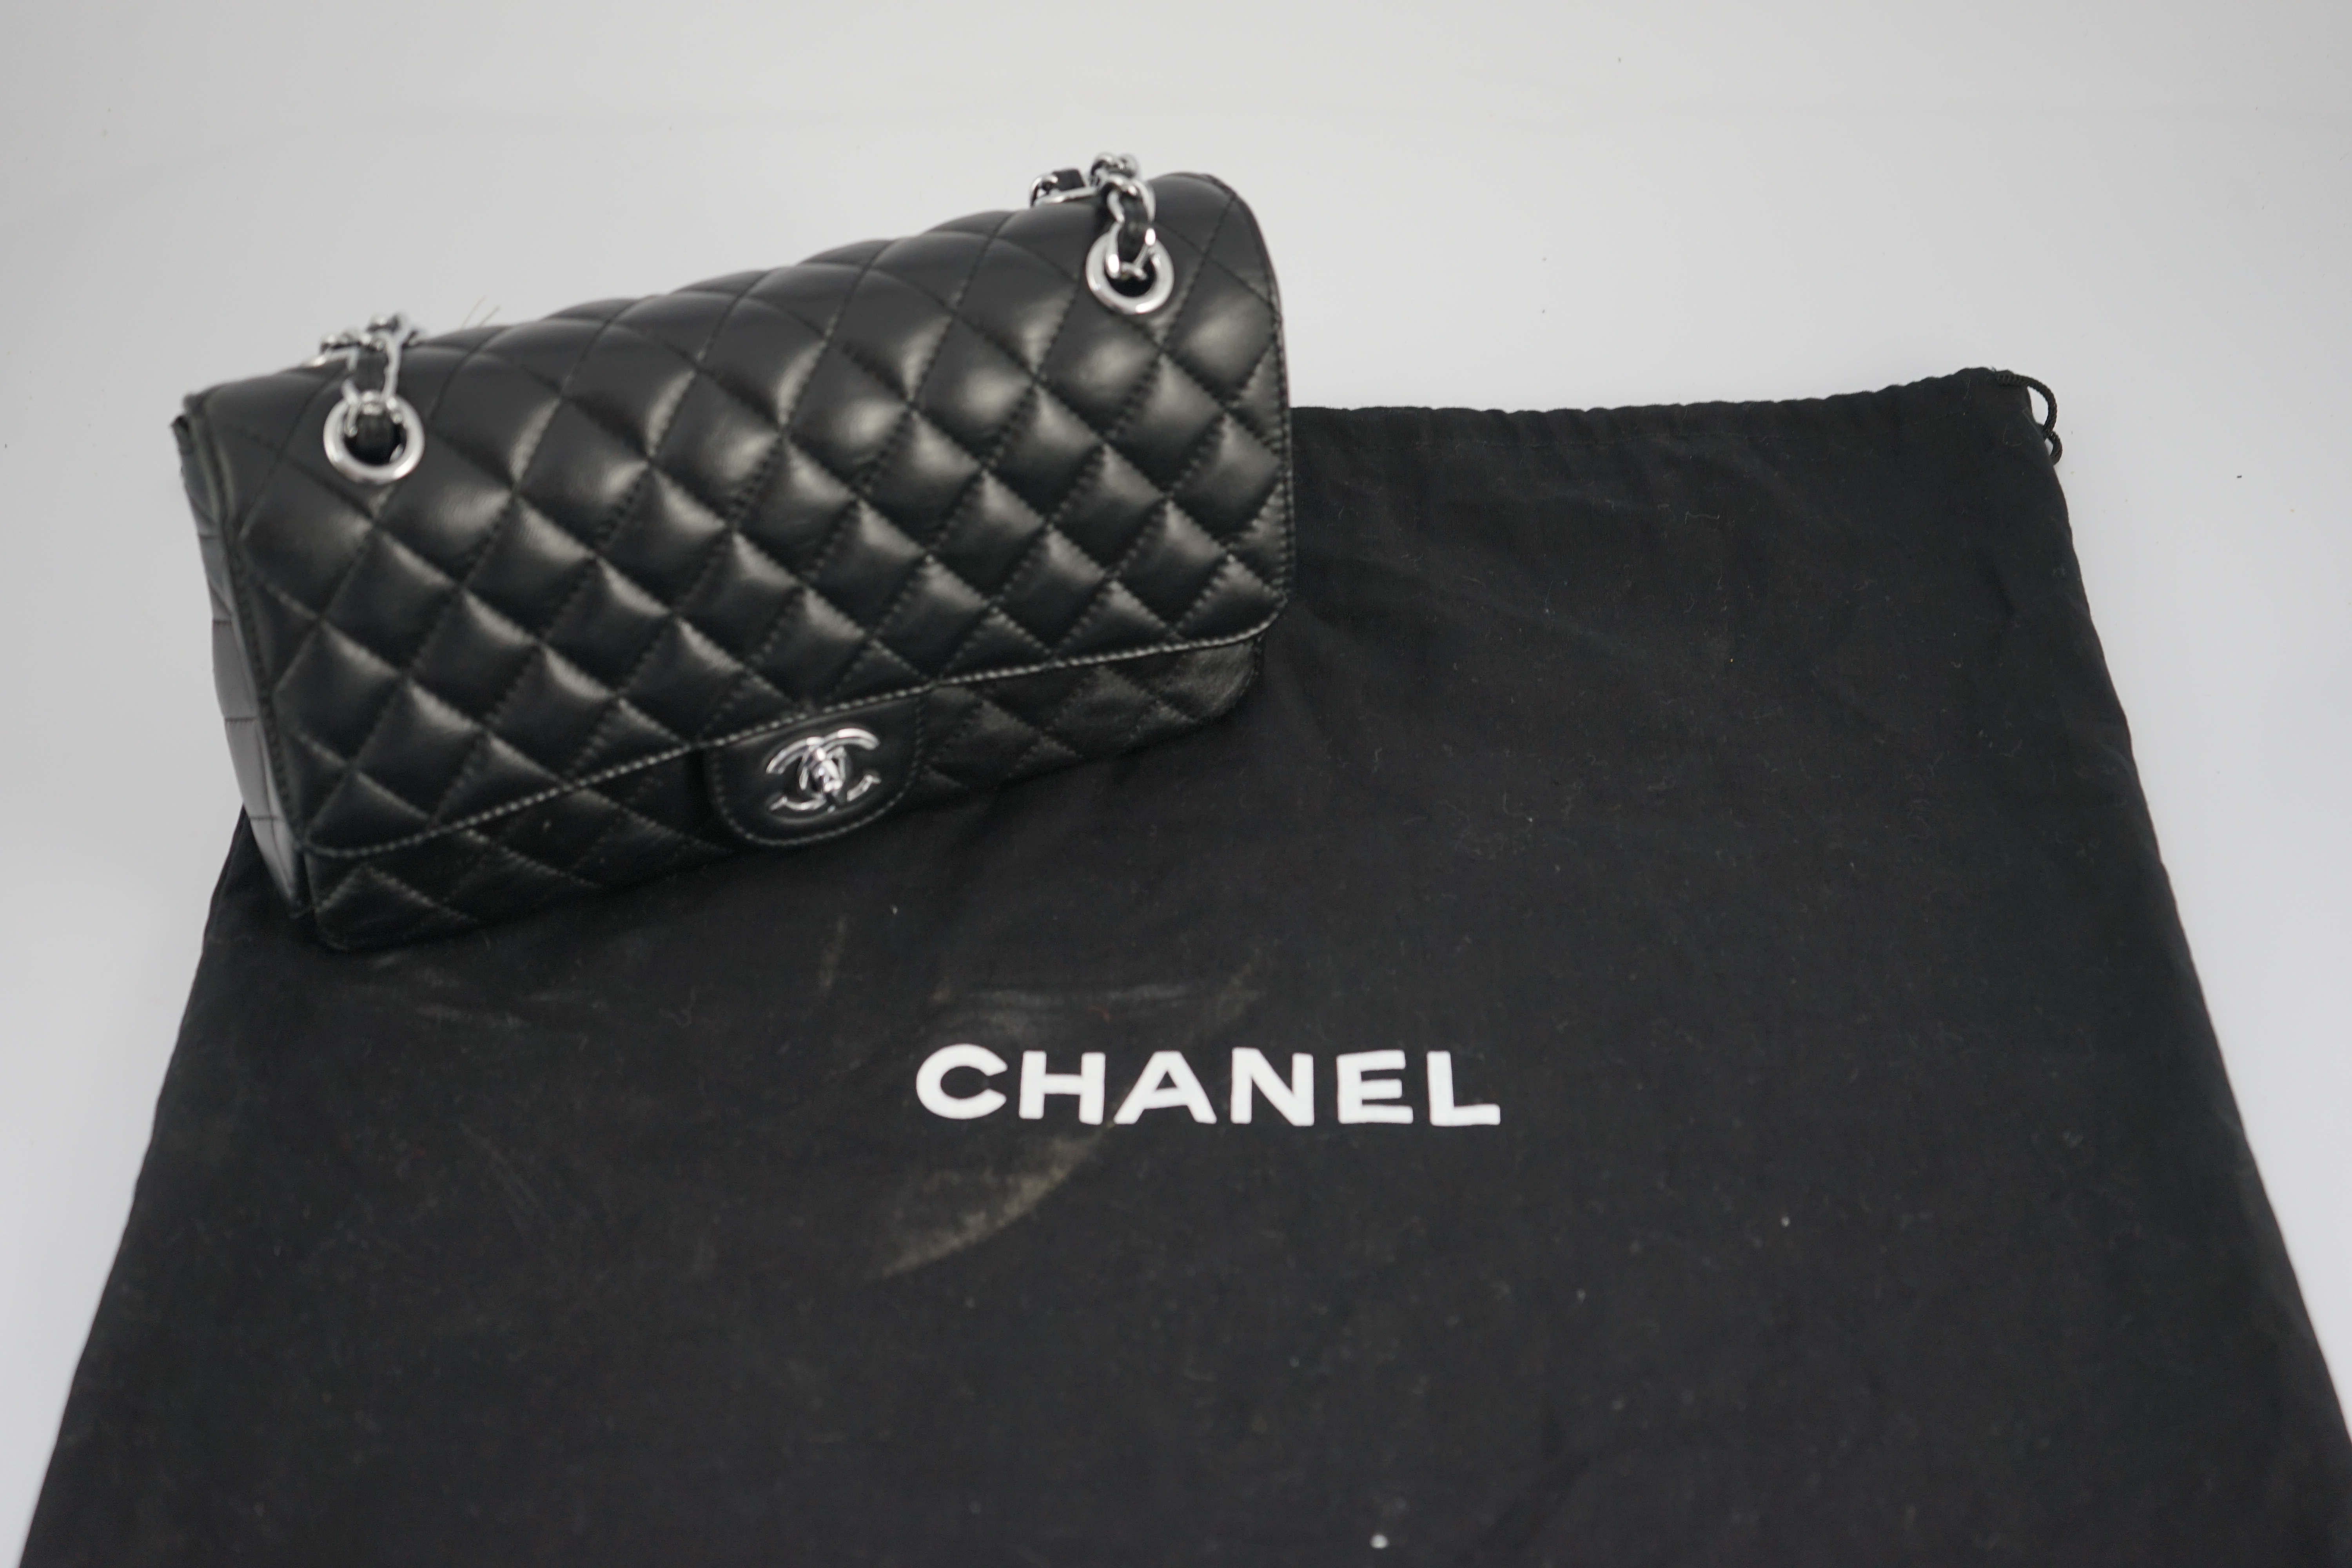 A Chanel classic black quilted leather shoulder bag width 25.5cm, depth 7cm, height 16cm